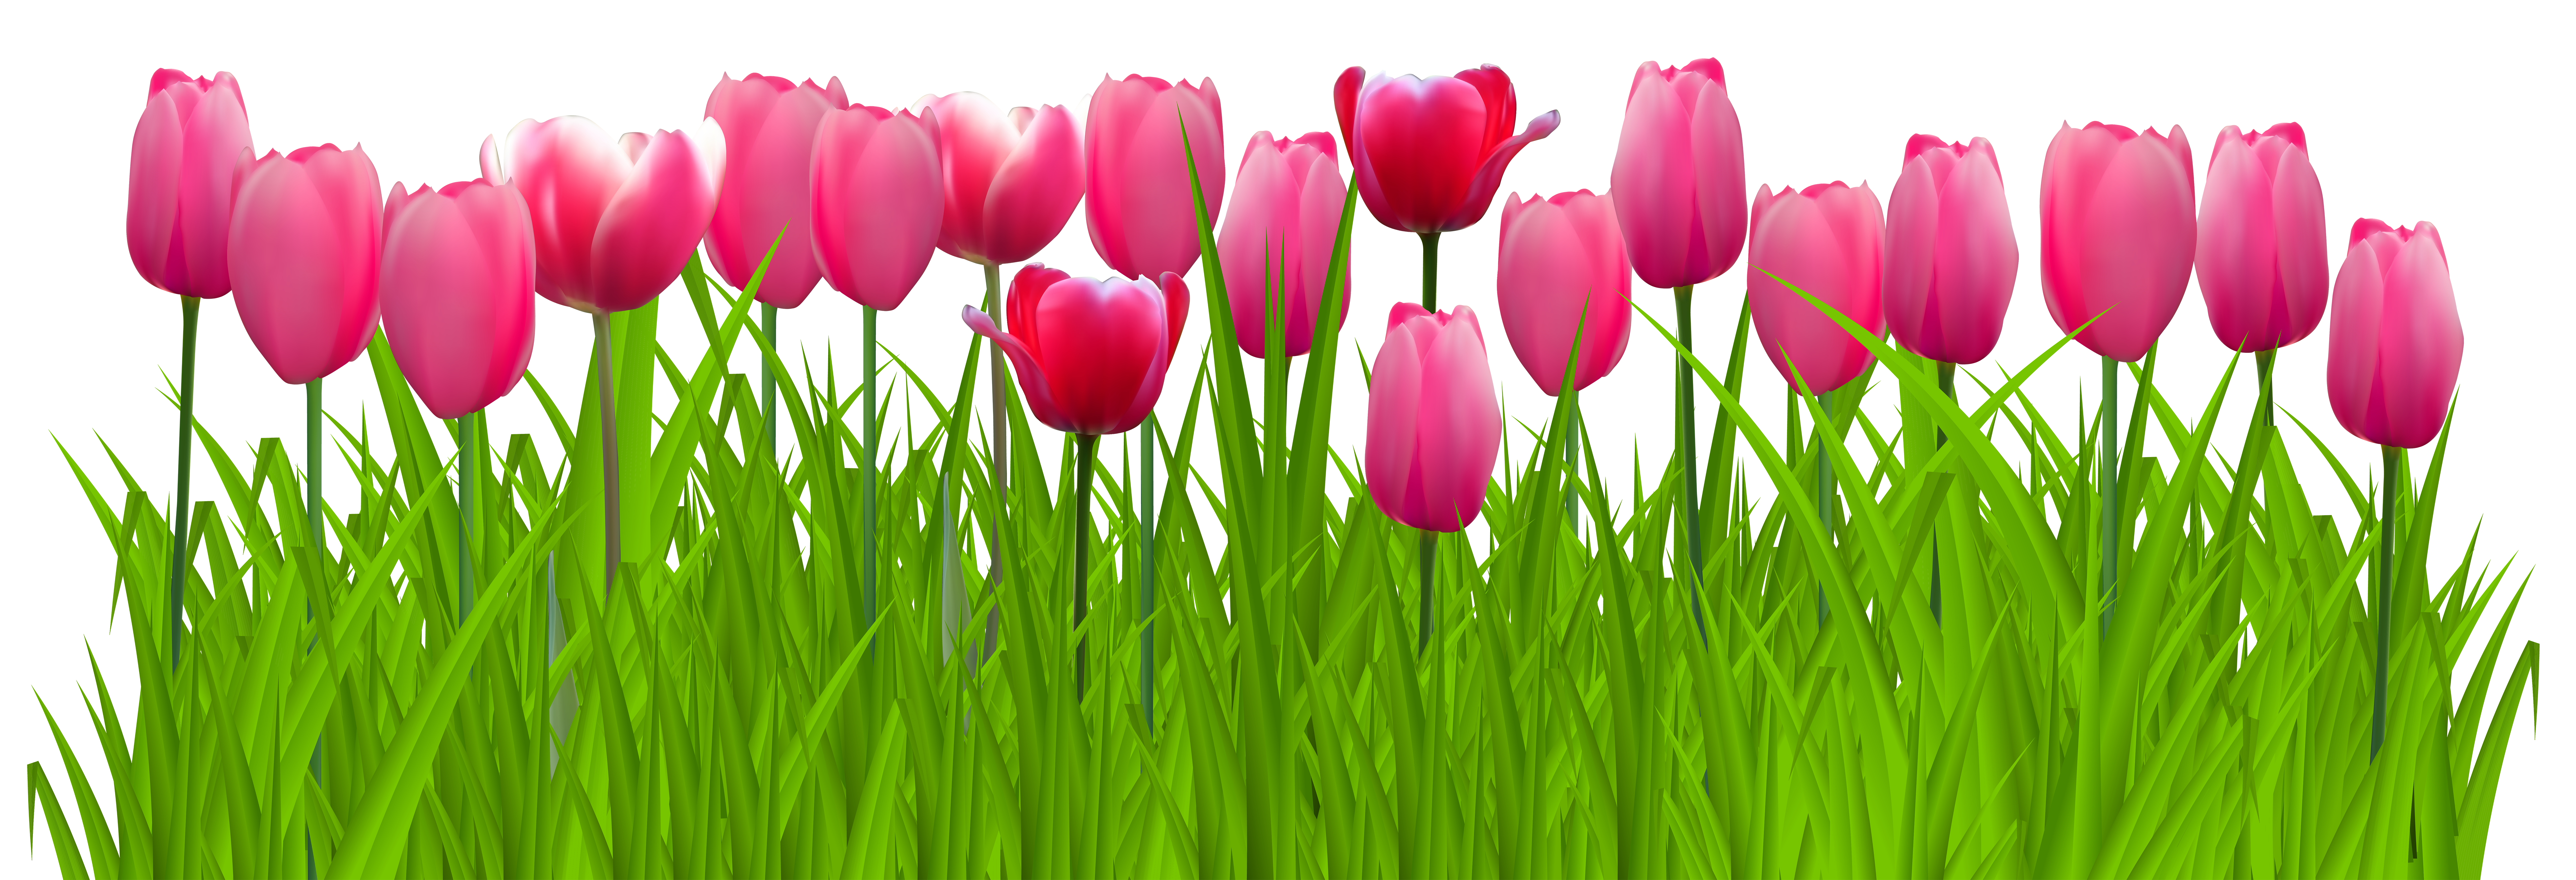  png yopriceville. Grass clipart tulip